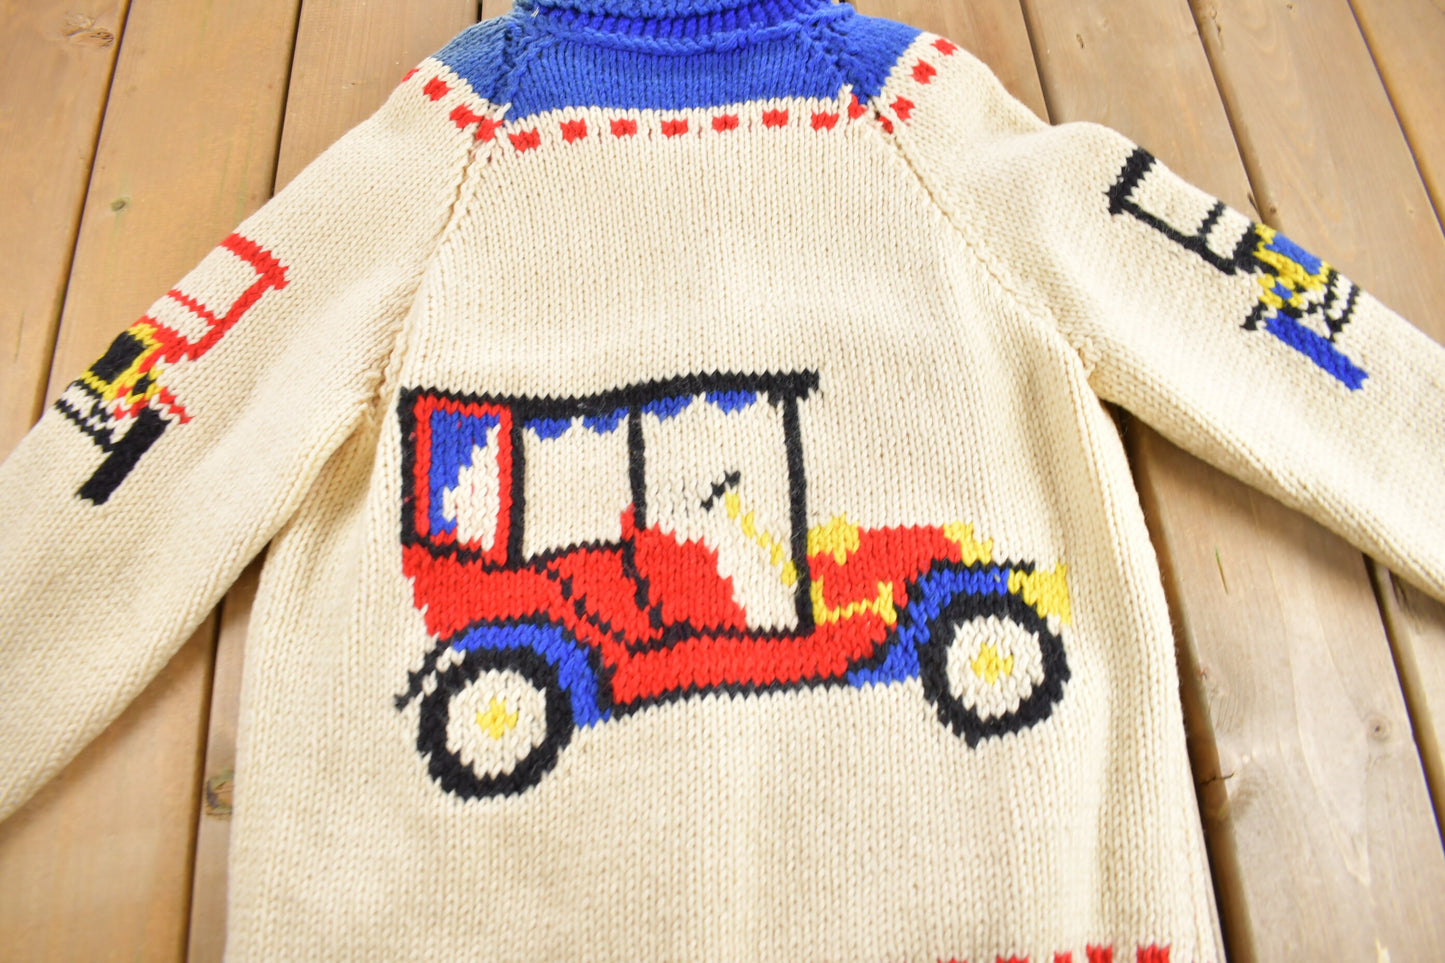 Vintage 1950s Hand-Knit Vintage Car Theme Cowichan Sweater / Wool / True Vintage / Outdoorsman / Heavy Weight / Size M